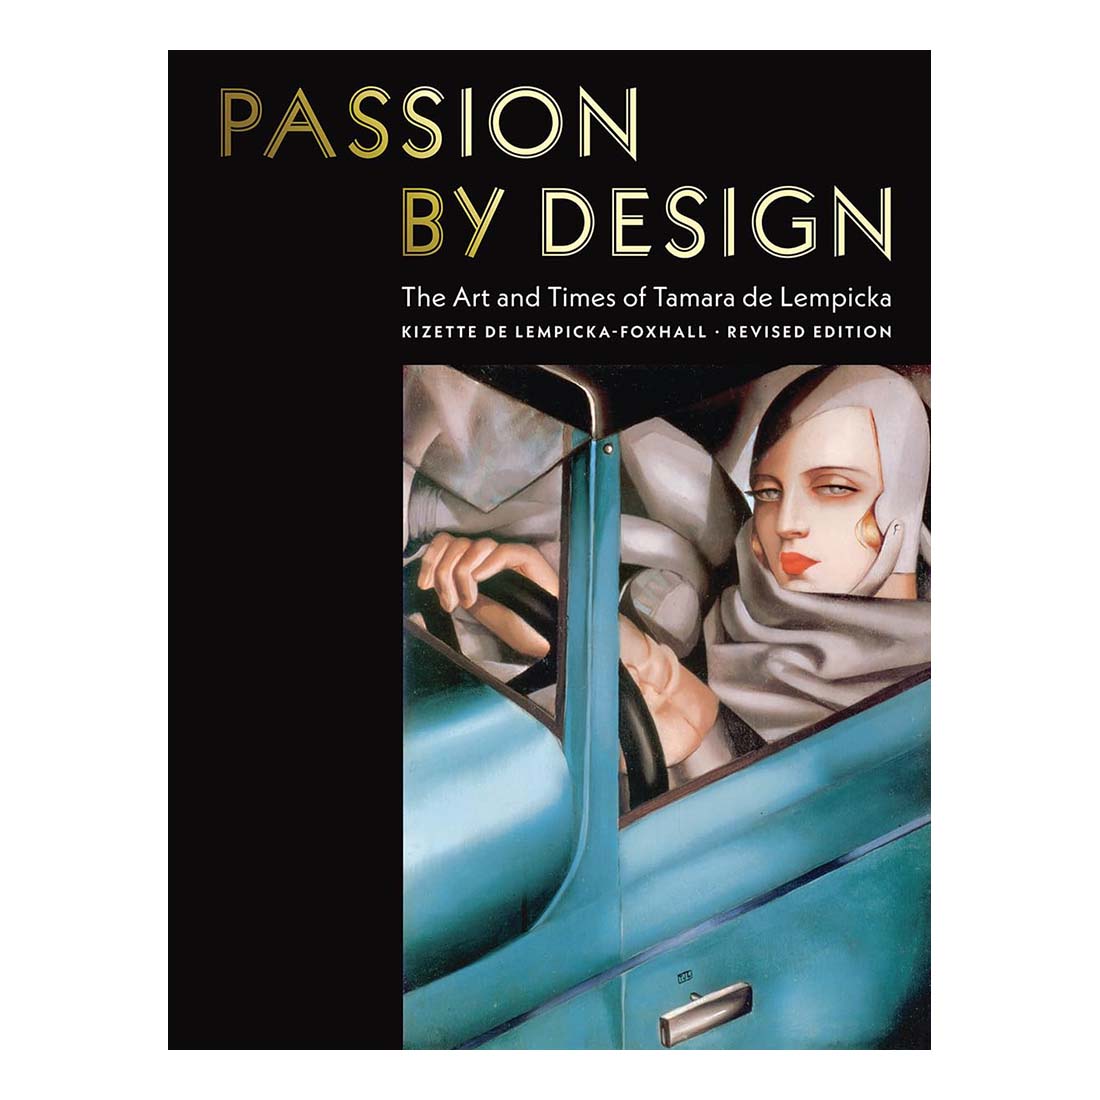 Passion by Design: The Life and Times of Tamara de Lempicka